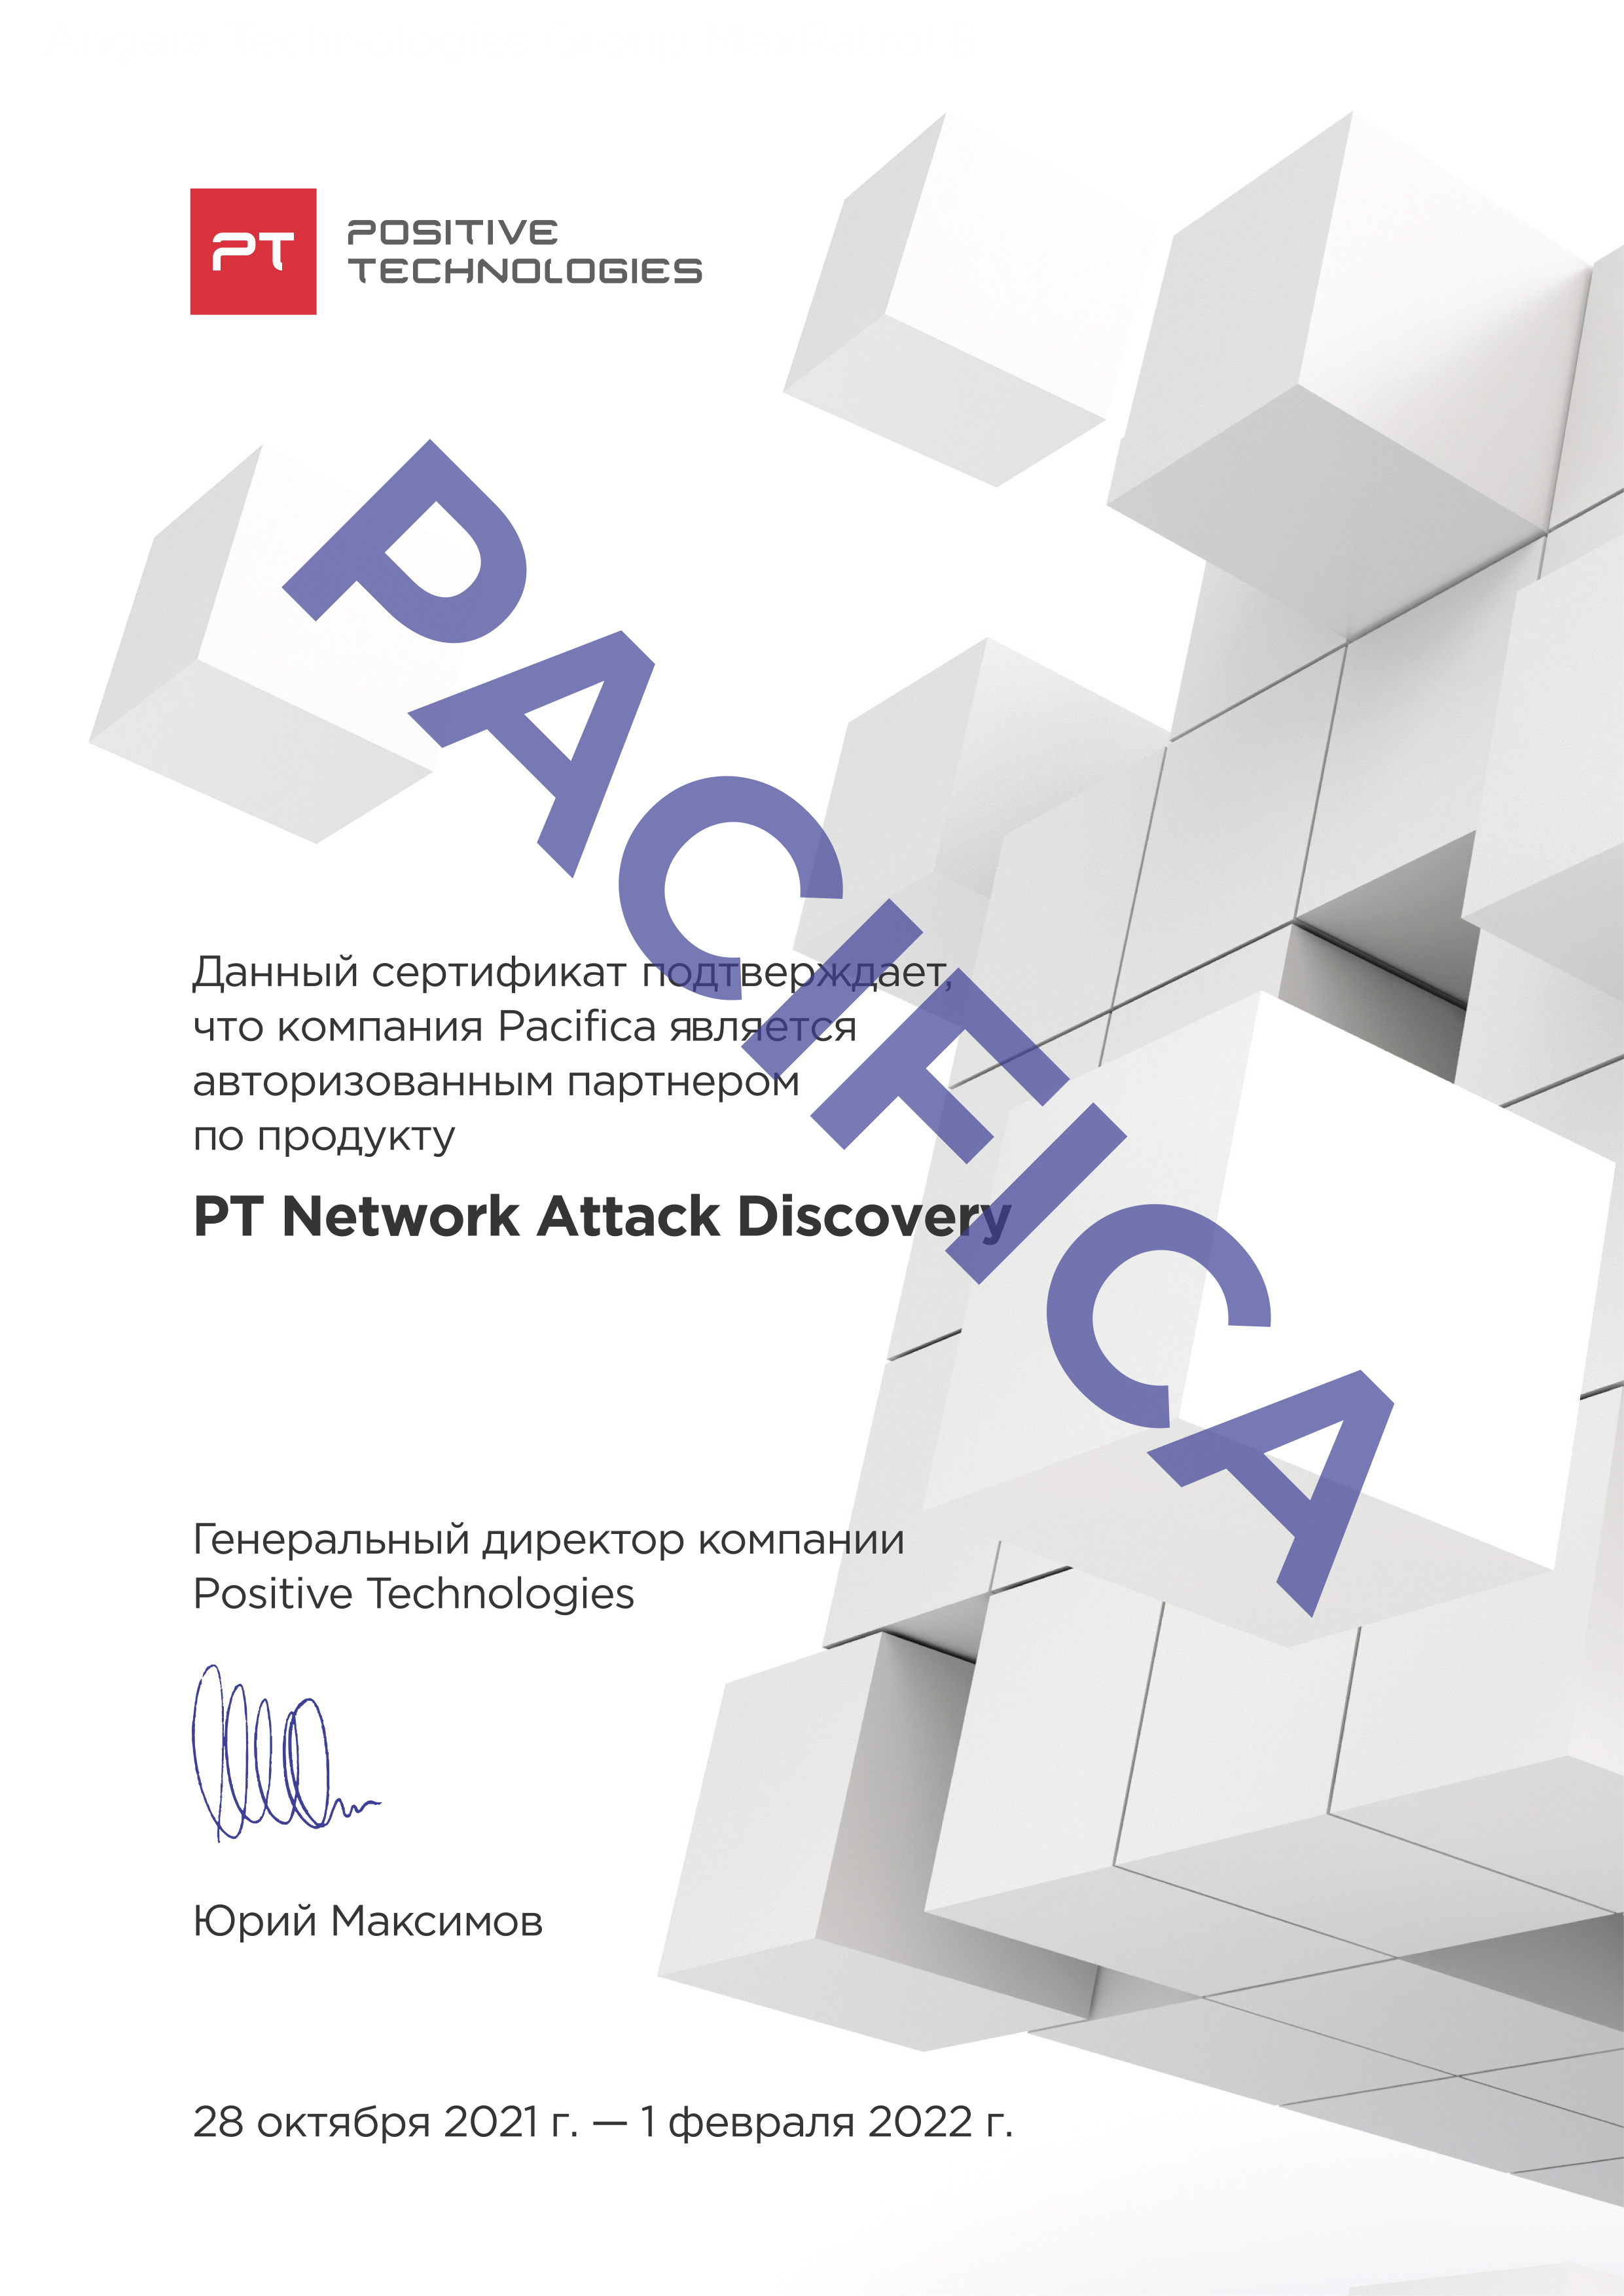 Positive Technologies Network Attack Discovery